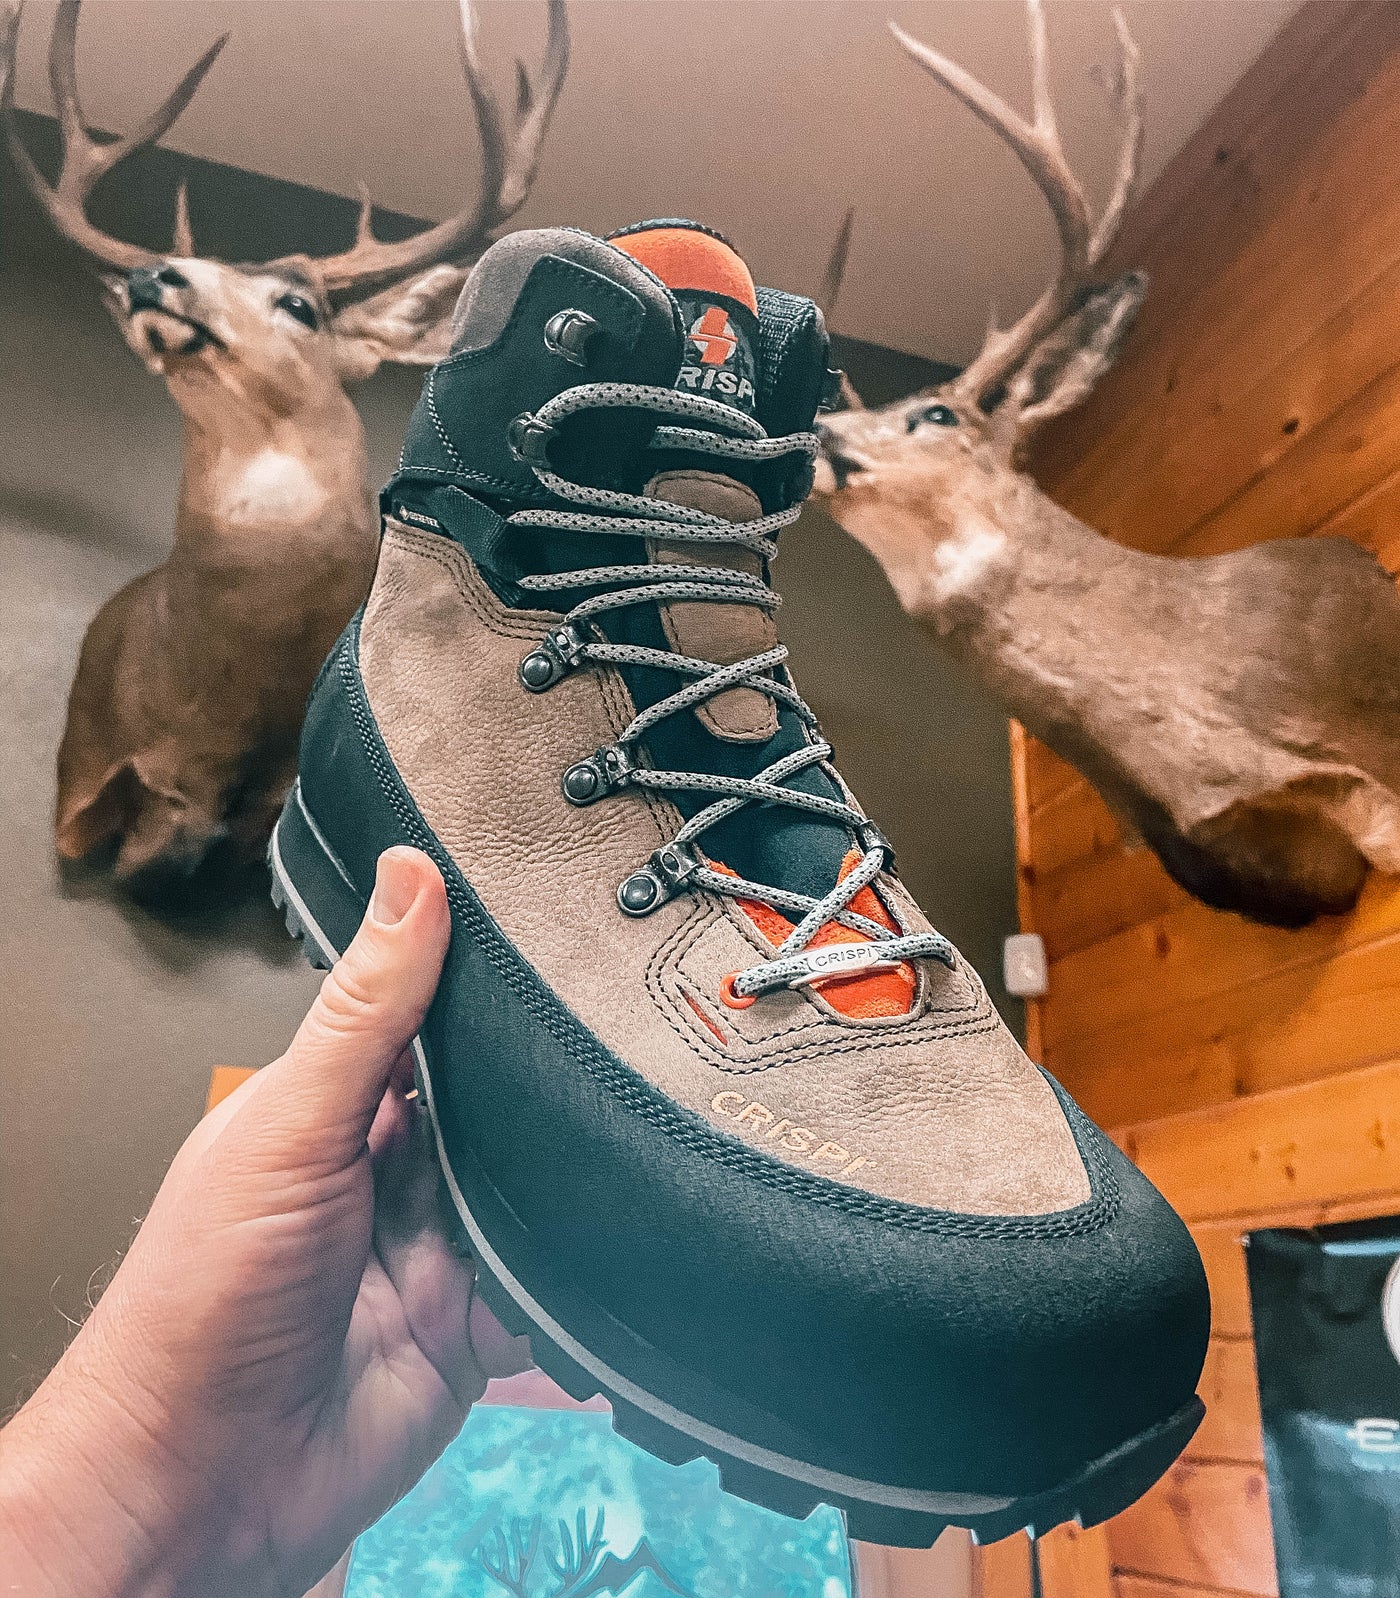 Crispi Lapponia GTX Review - More than just an Early Season Boot